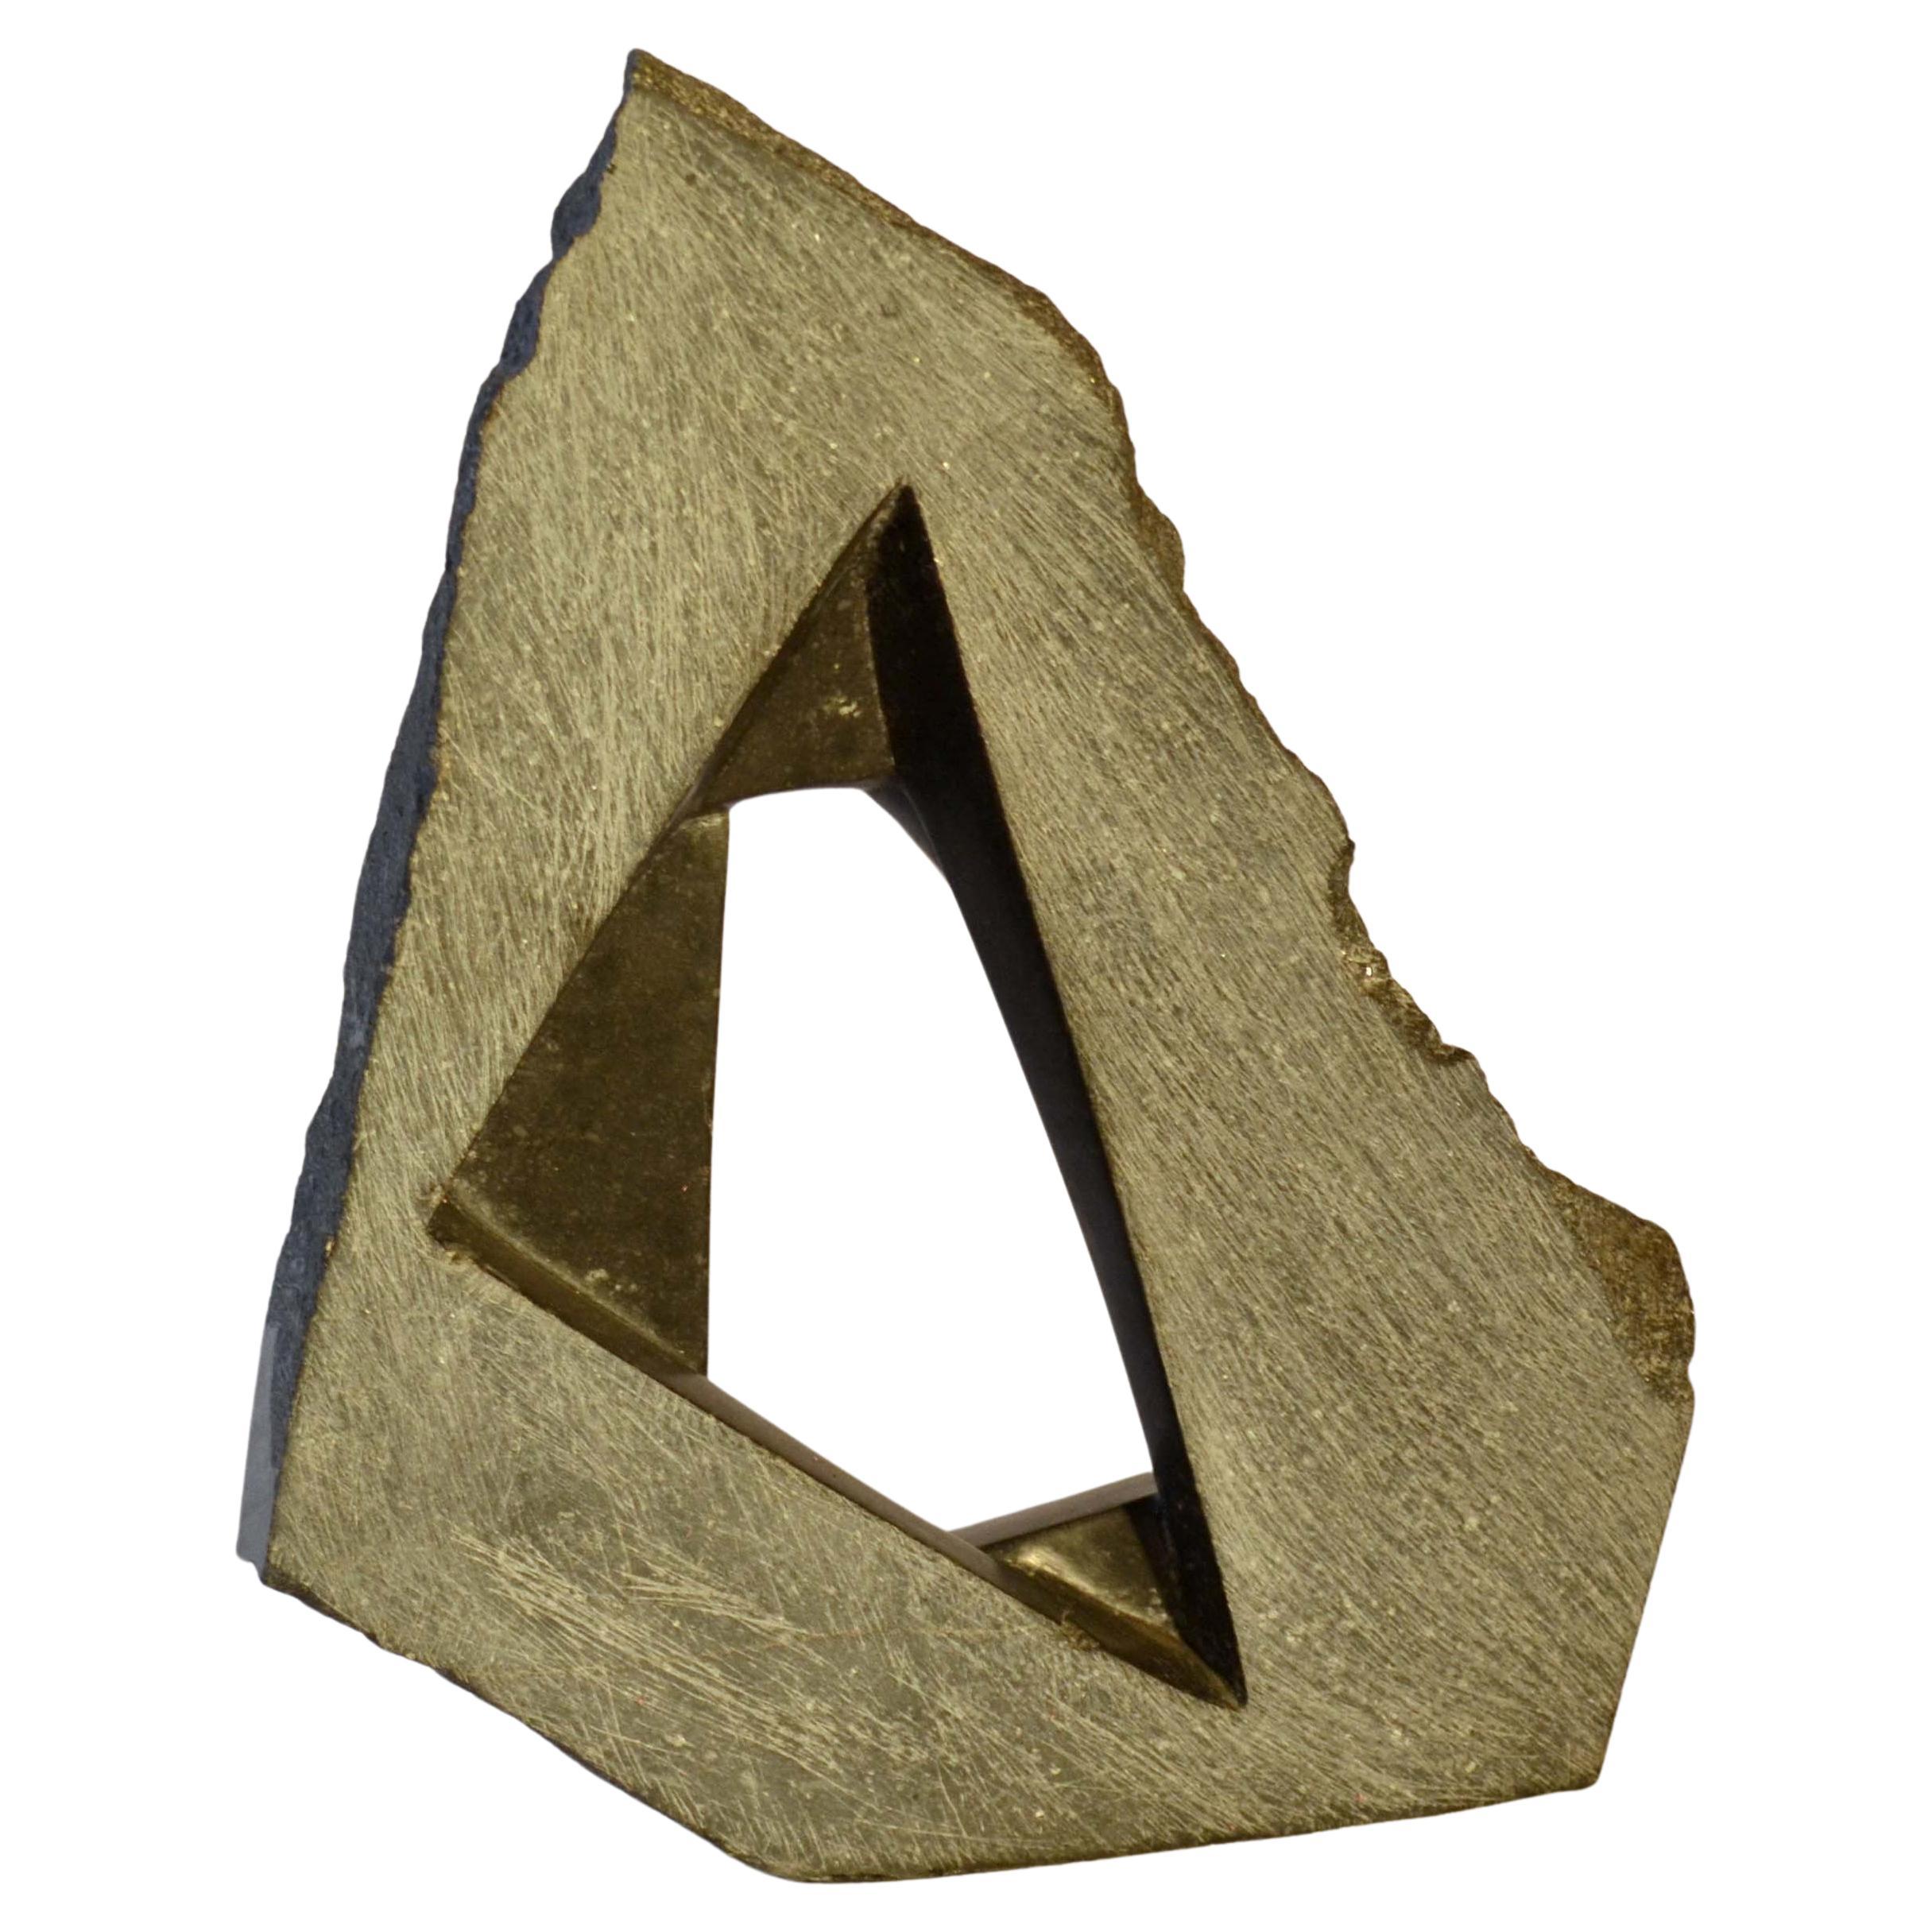 Abstract Minimal sculpture hand carved granite by the Dutch artist J. Metaho, made in the 1970's. The polished slice of granite is carved with triangular openings and floating planes at angled positions from both sides of the sculpture. The whole